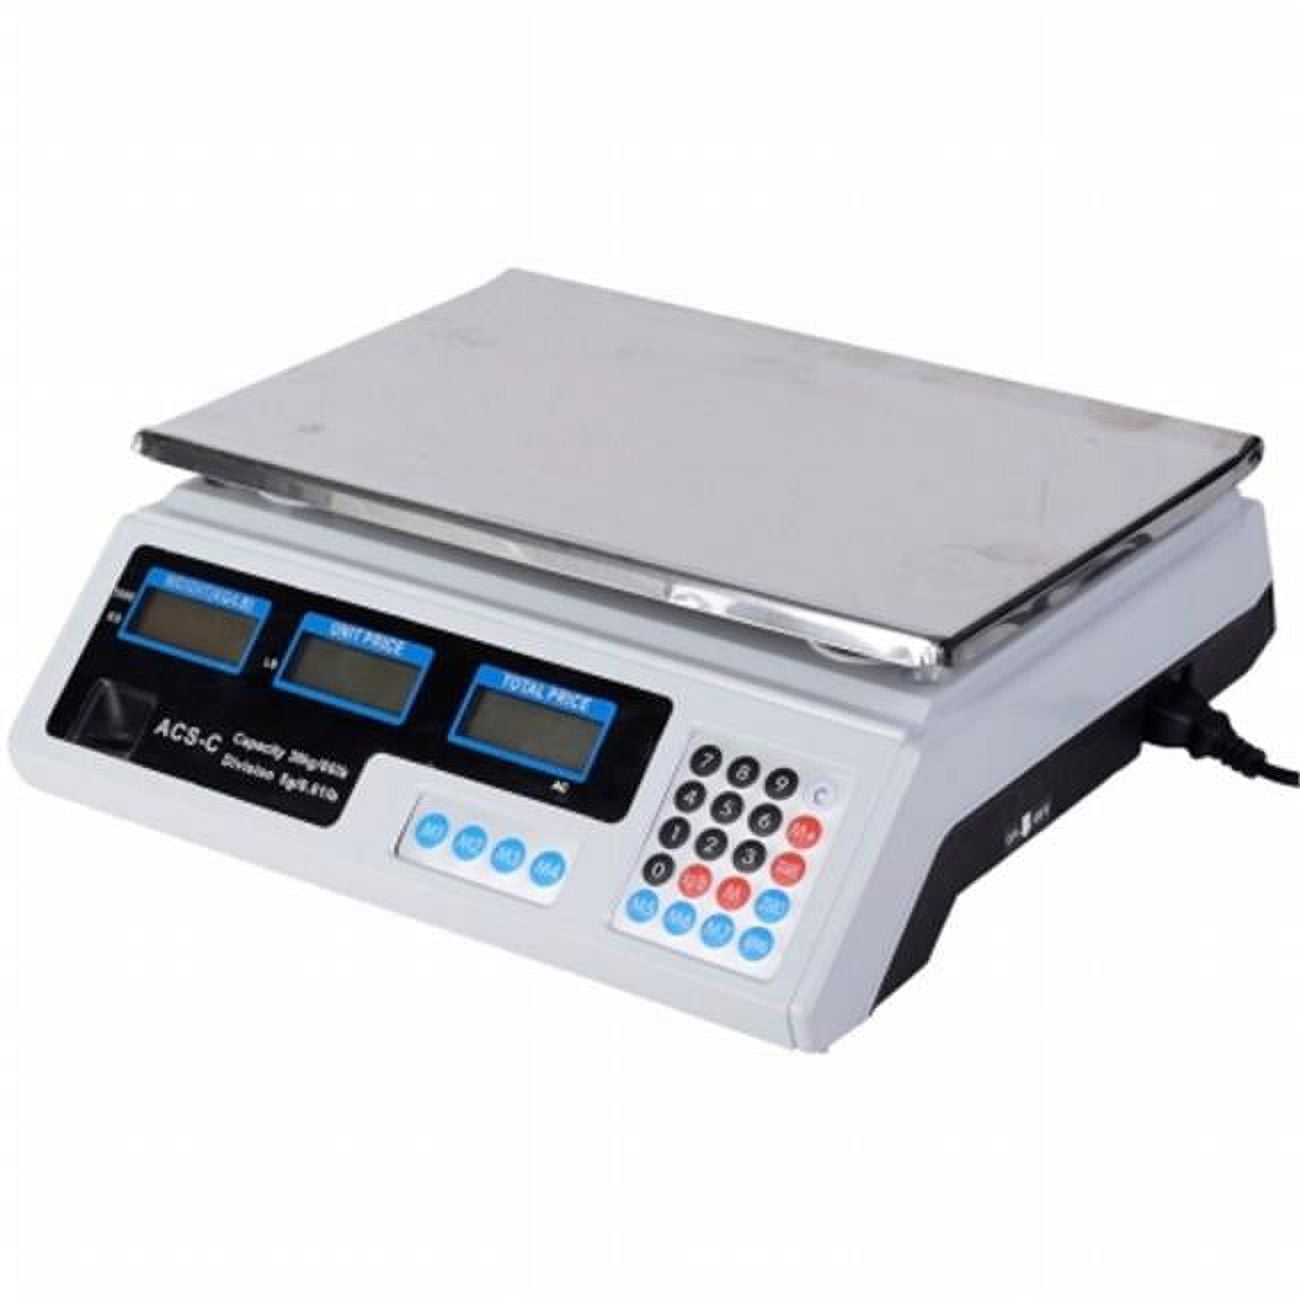 66 lbs Weight Scale Digital Food Scales Count Scale, White & Black 